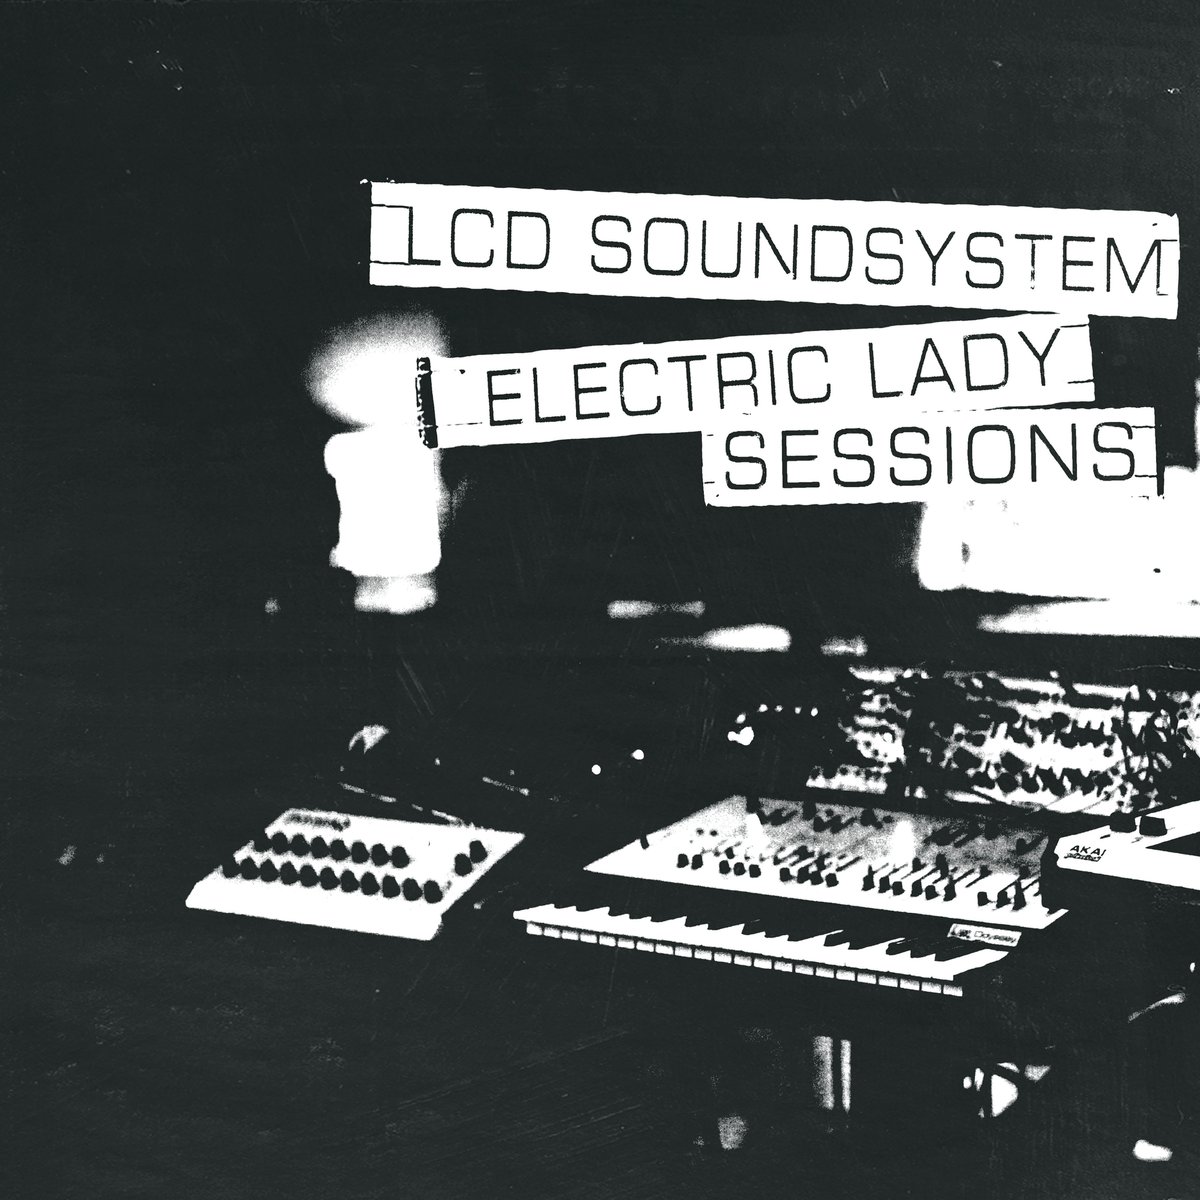 Image of LCD SOUNDSYSTEM | ELECTRIC LADY SESSIONS